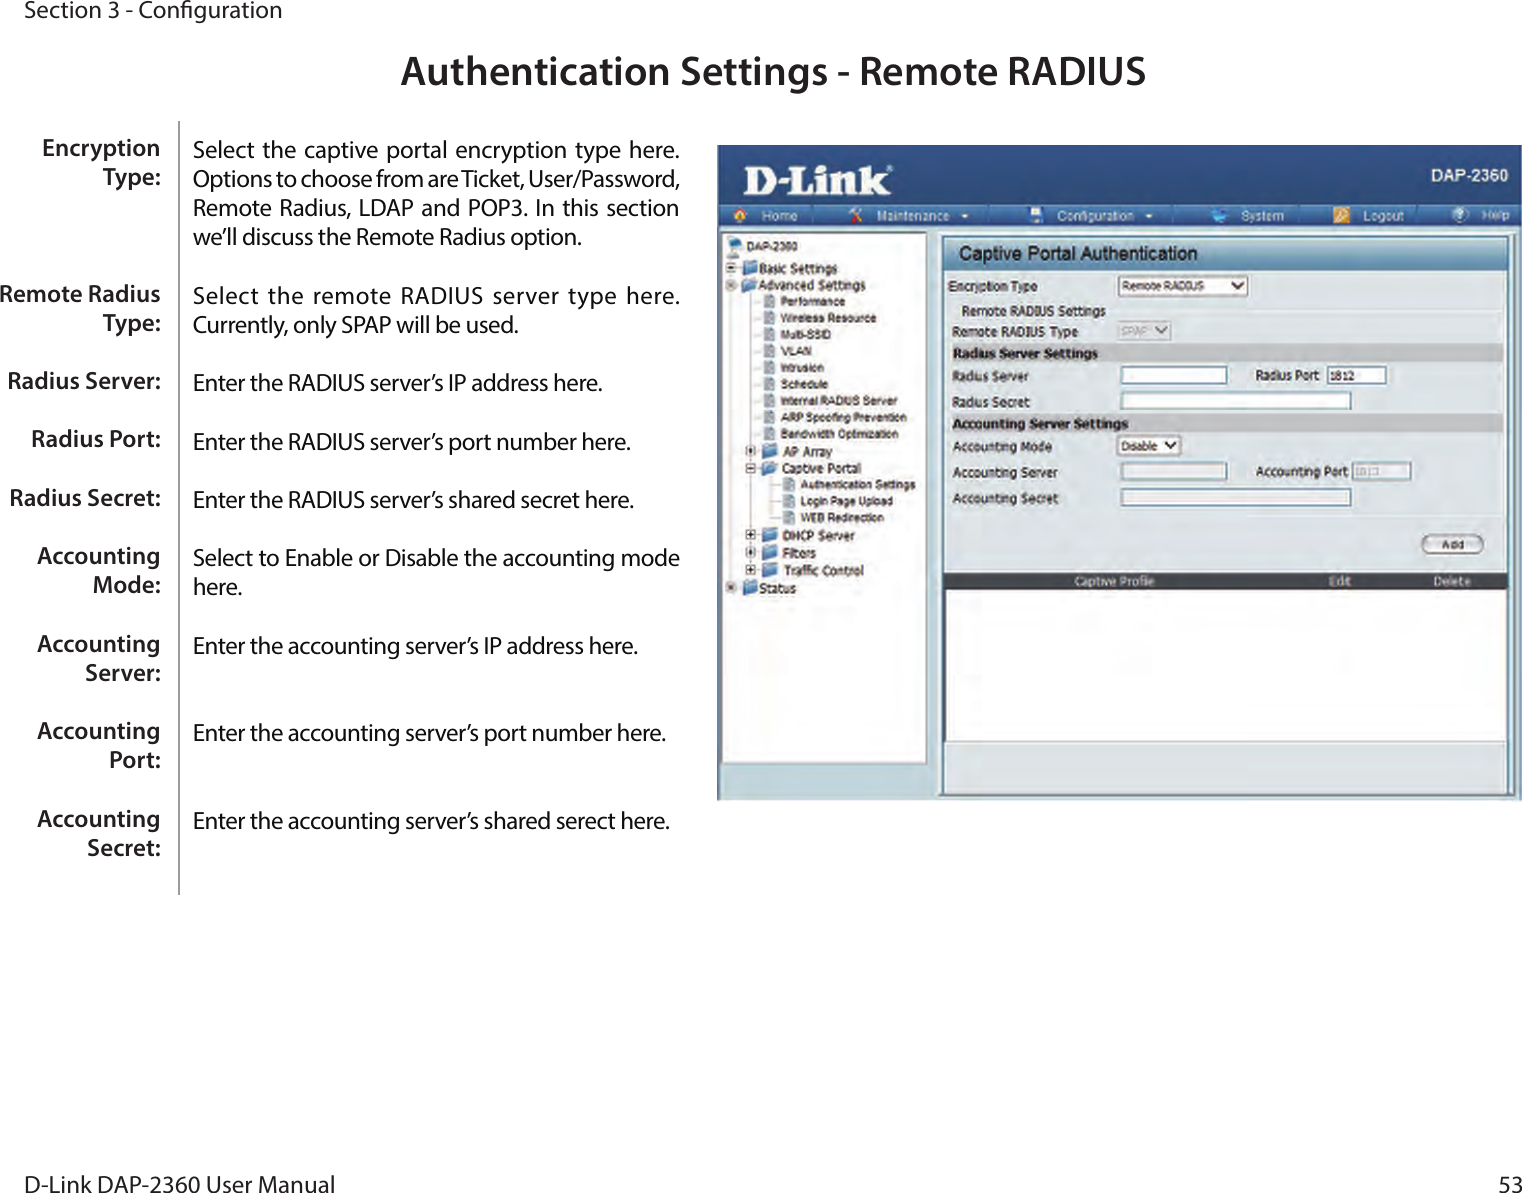 53D-Link DAP-2360 User ManualSection 3 - CongurationAuthentication Settings - Remote RADIUSSelect the captive portal encryption type here. Options to choose from are Ticket, User/Password, Remote Radius, LDAP and POP3. In this section we’ll discuss the Remote Radius option.Select  the remote RADIUS  server  type here. Currently, only SPAP will be used.Enter the RADIUS server’s IP address here.Enter the RADIUS server’s port number here.Enter the RADIUS server’s shared secret here.Select to Enable or Disable the accounting mode here.Enter the accounting server’s IP address here.Enter the accounting server’s port number here.Enter the accounting server’s shared serect here. Encryption Type:Remote Radius Type:Radius Server:Radius Port:Radius Secret:Accounting Mode:Accounting Server:Accounting Port:Accounting Secret: